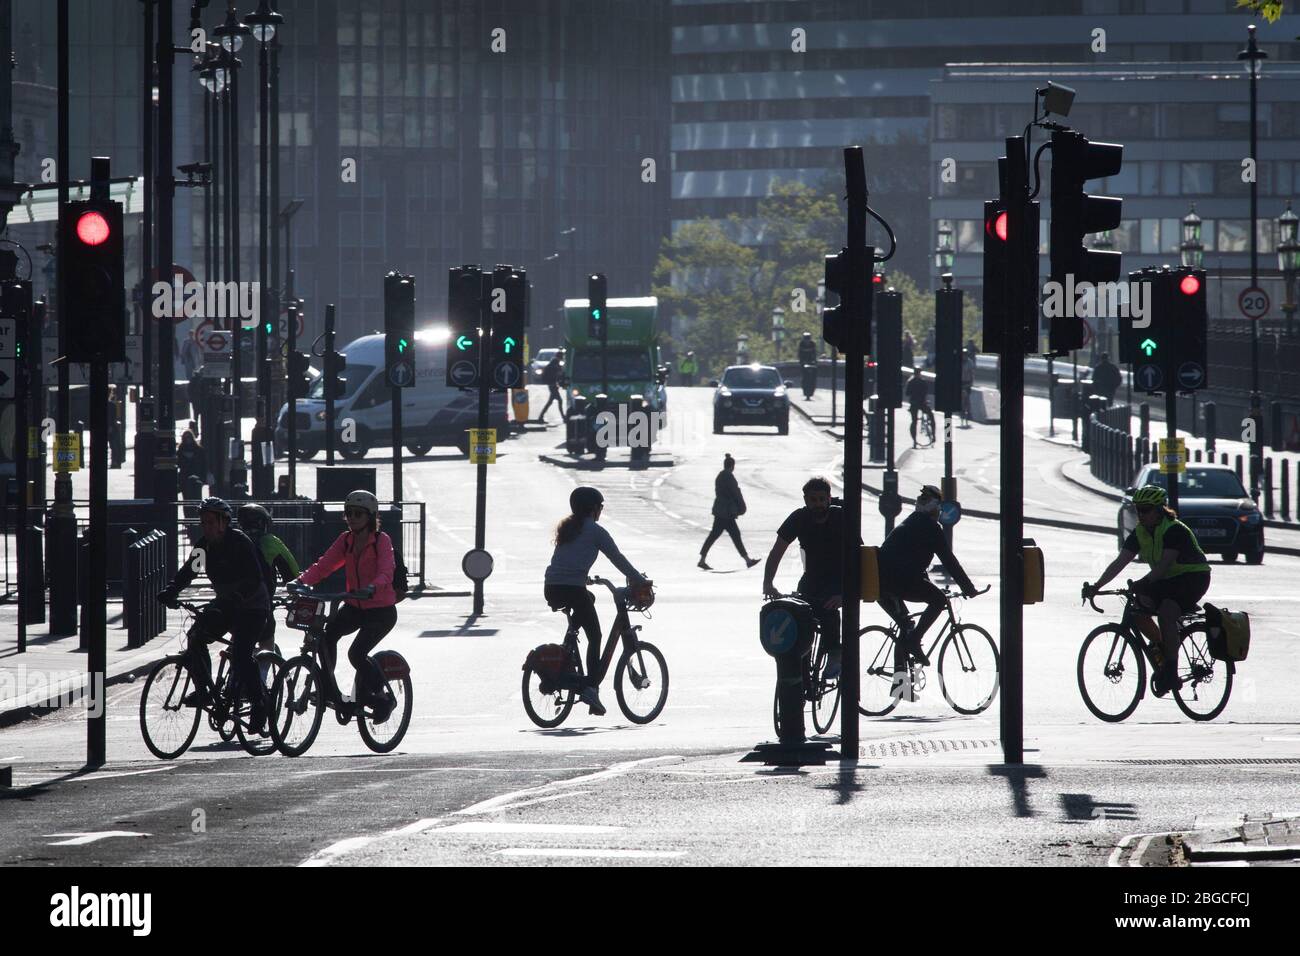 Workers and cyclists in Westminster early this morning as the UK continues in lockdown to help curb the spread of the coronavirus. PA Photo. Picture date: Tuesday April 21, 2020. See PA story HEALTH Coronavirus. Photo credit should read: Stefan Rousseau/PA Wire Stock Photo